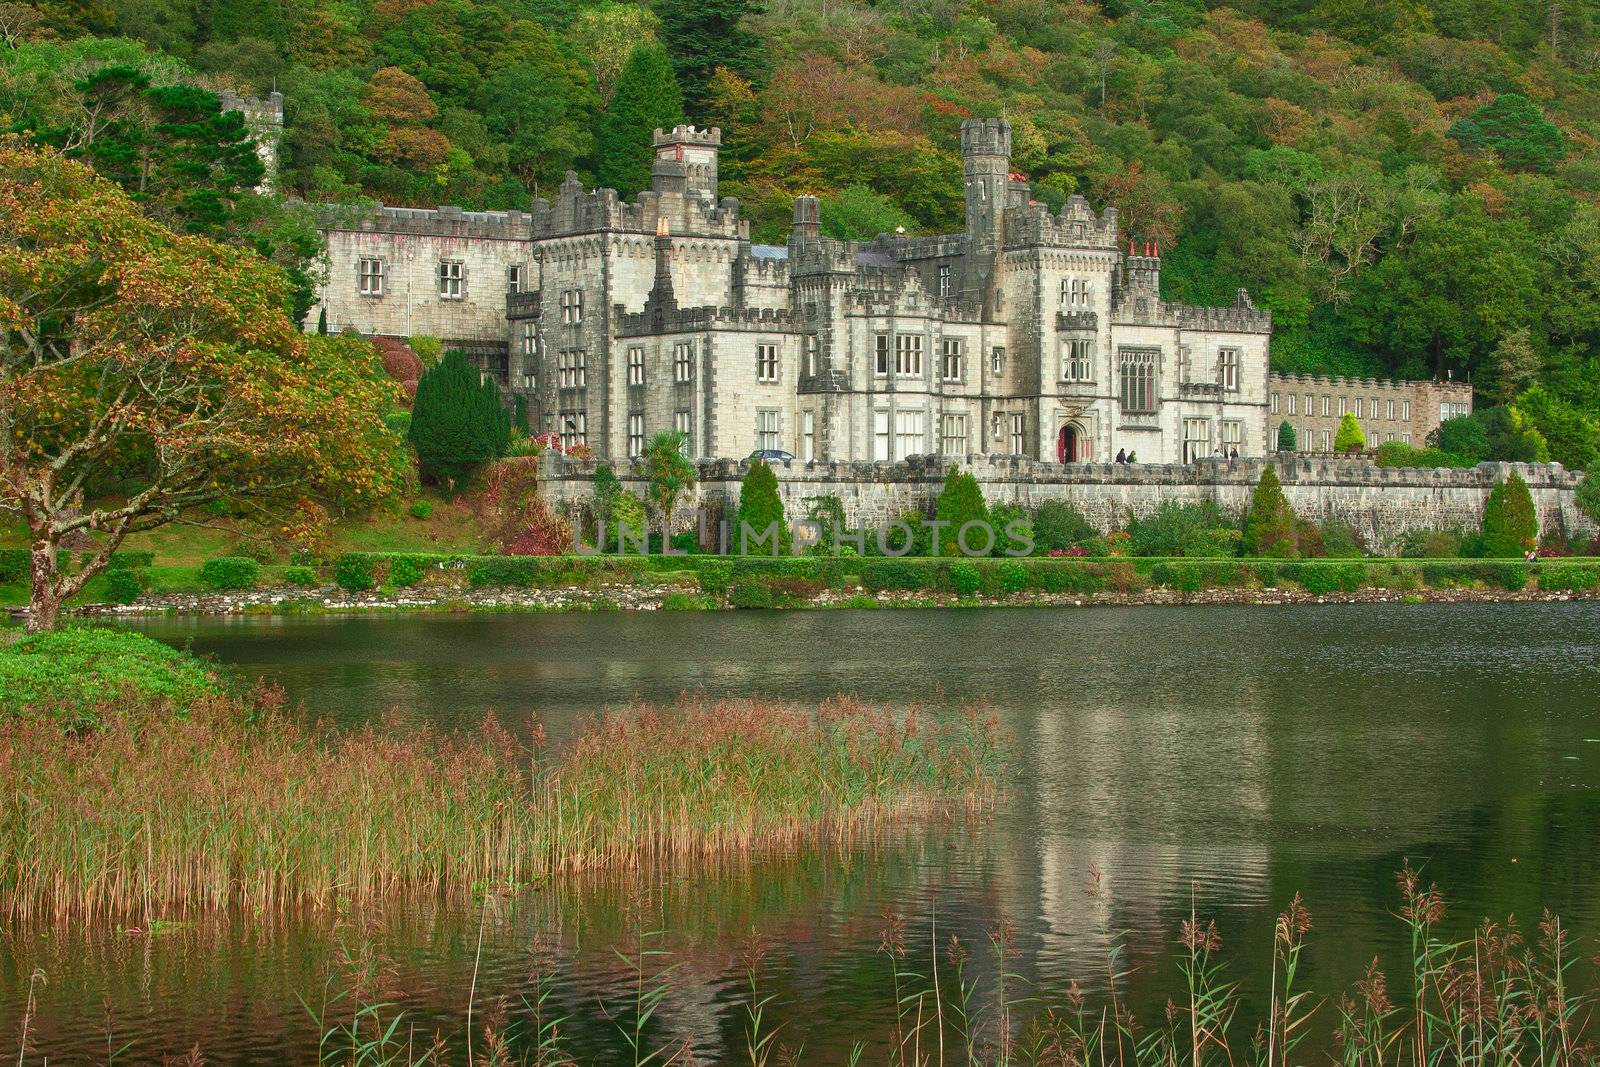 Kylemore Abbey is a Benedictine monastery founded in 1920 in Connemara, County Galway, Ireland.